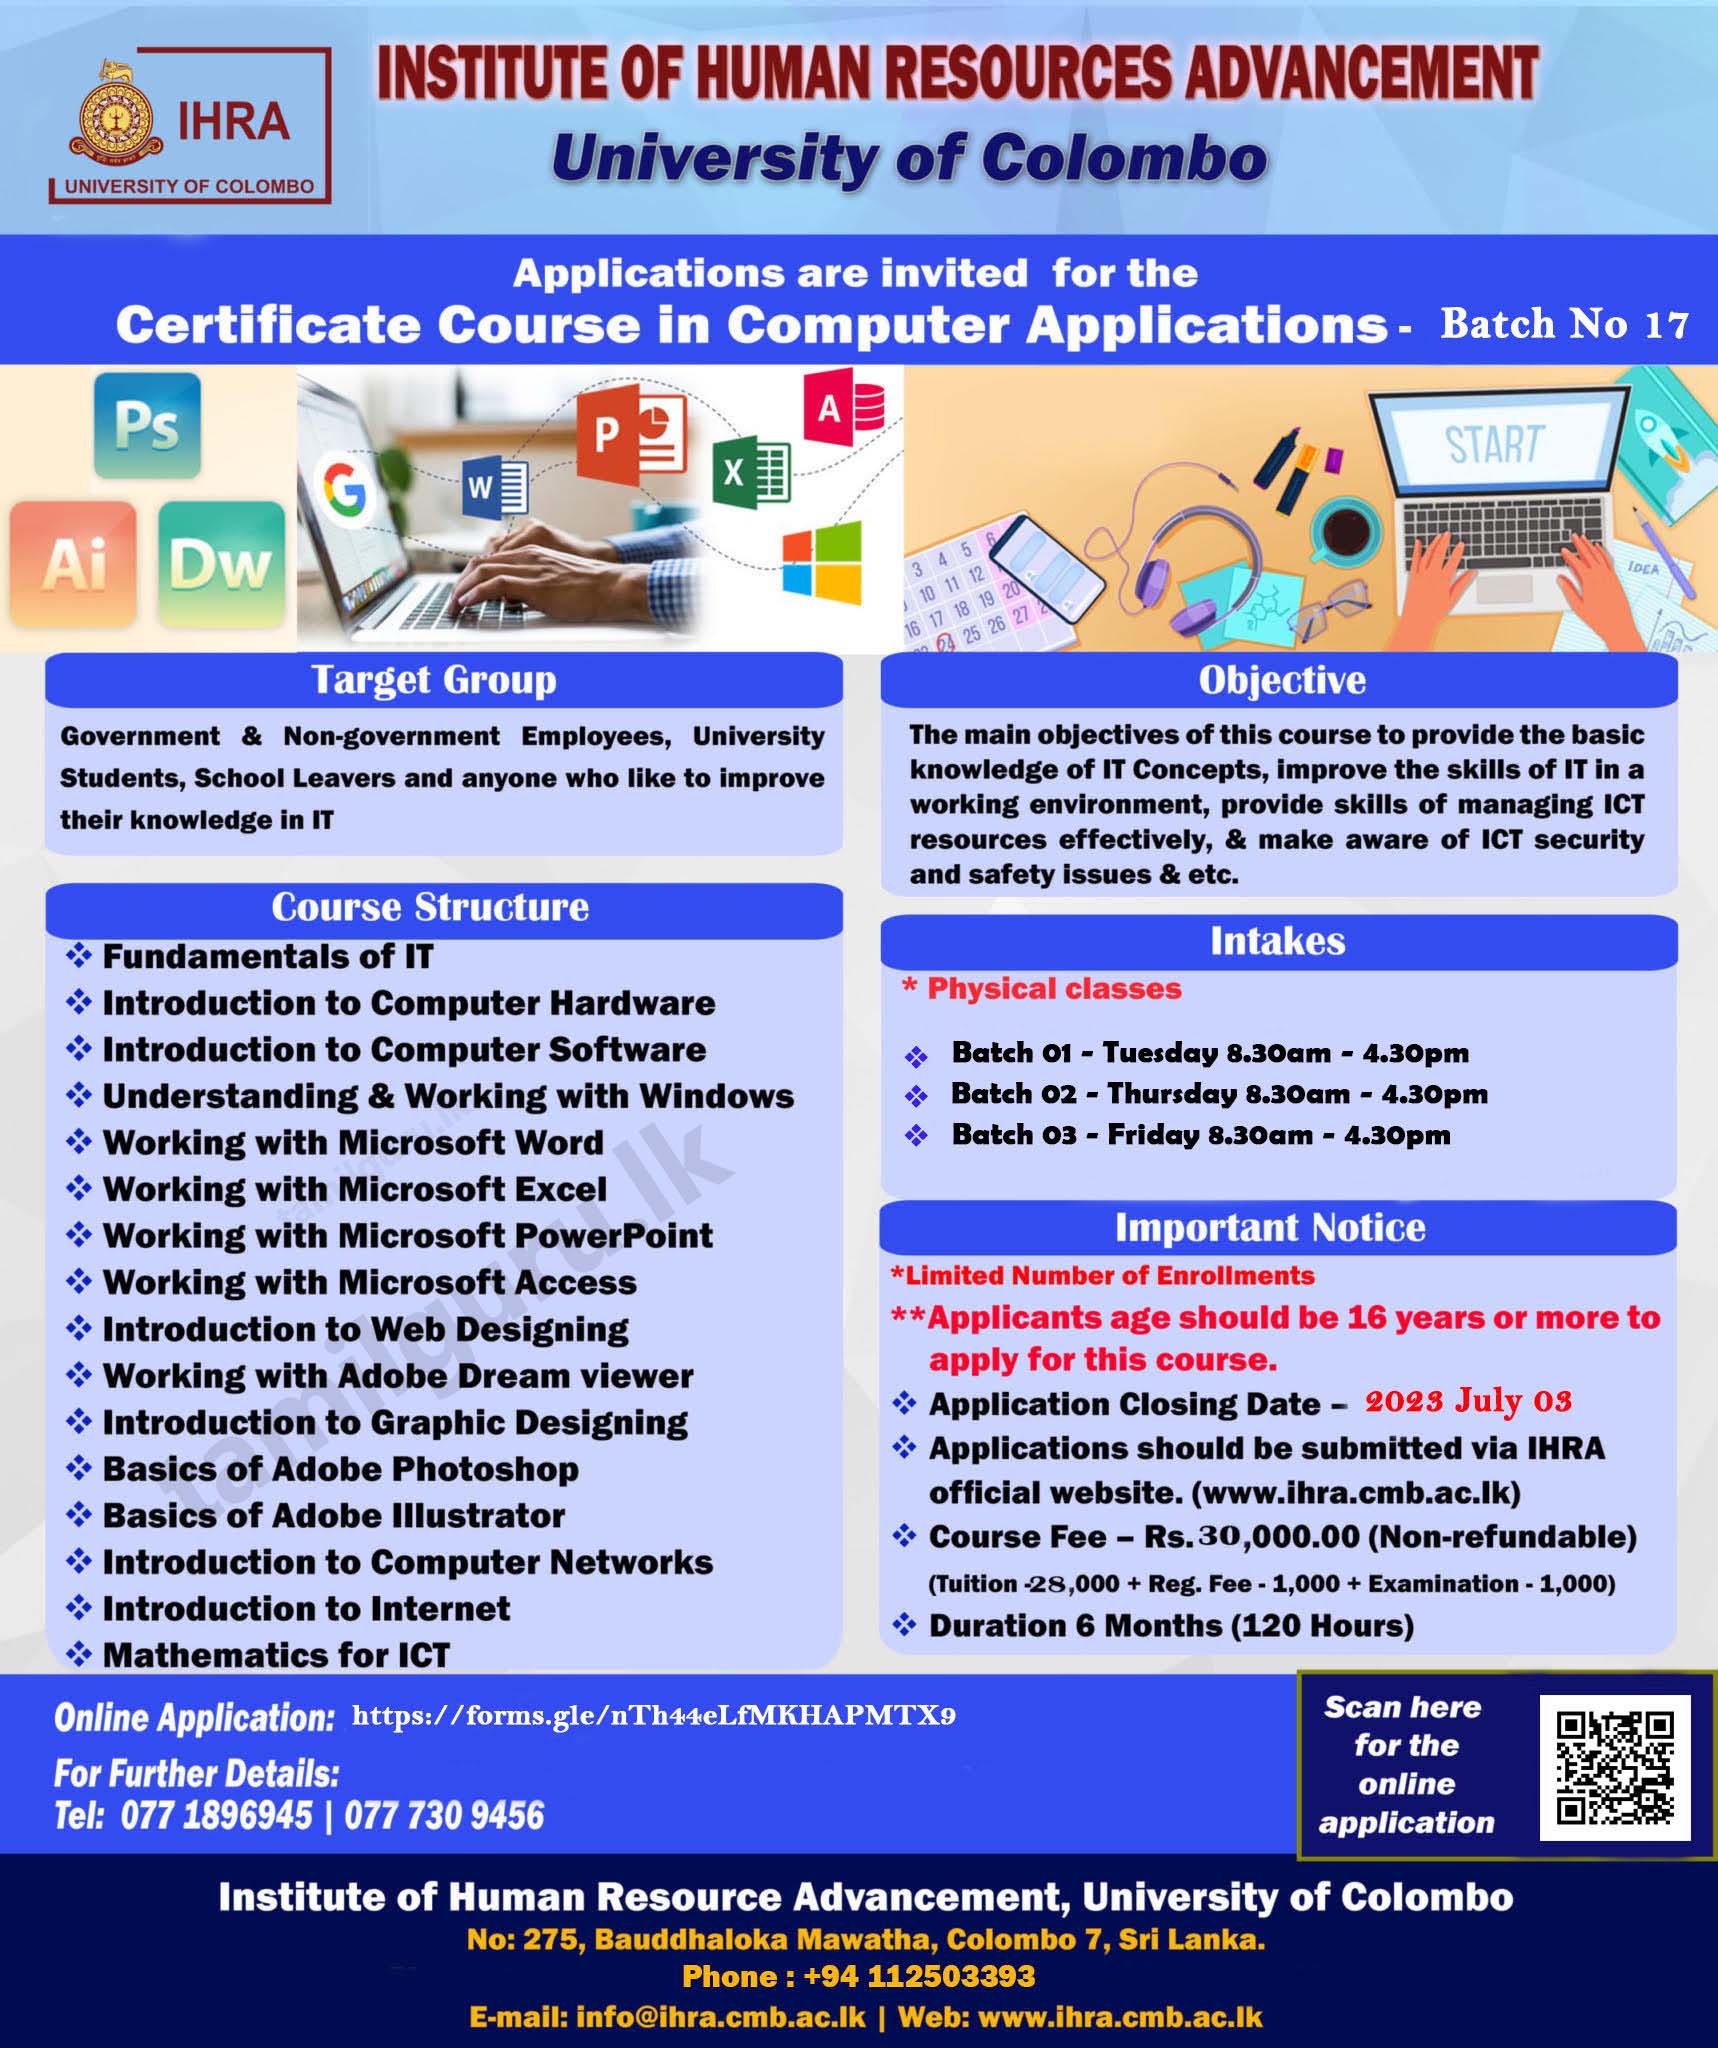 Certificate Course in Computer Applications (2023) - IHRA, University of Colombo